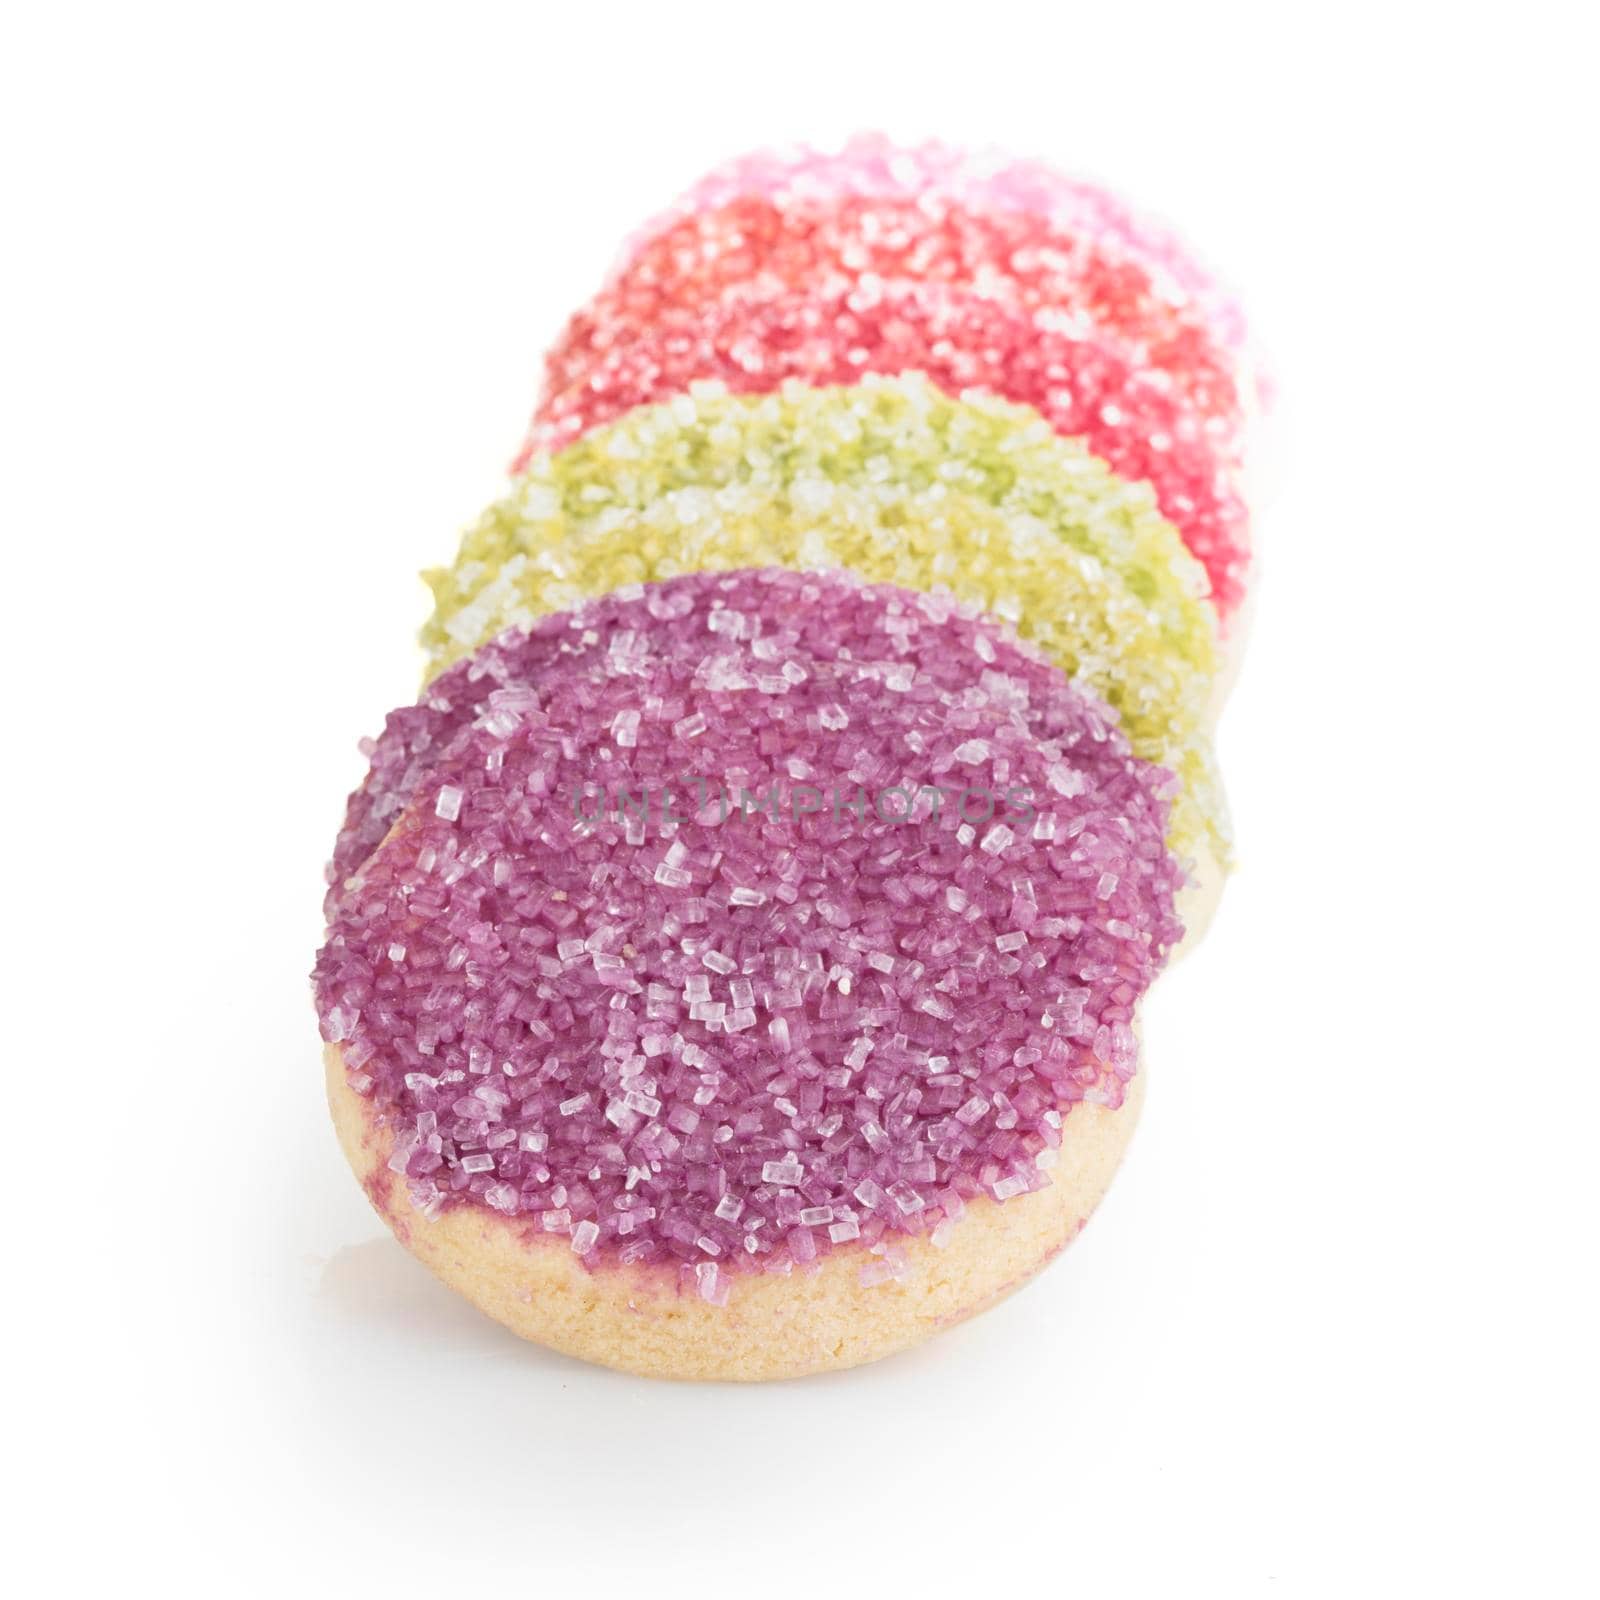 Colorful shortbread sugar cookies on white background with shadow